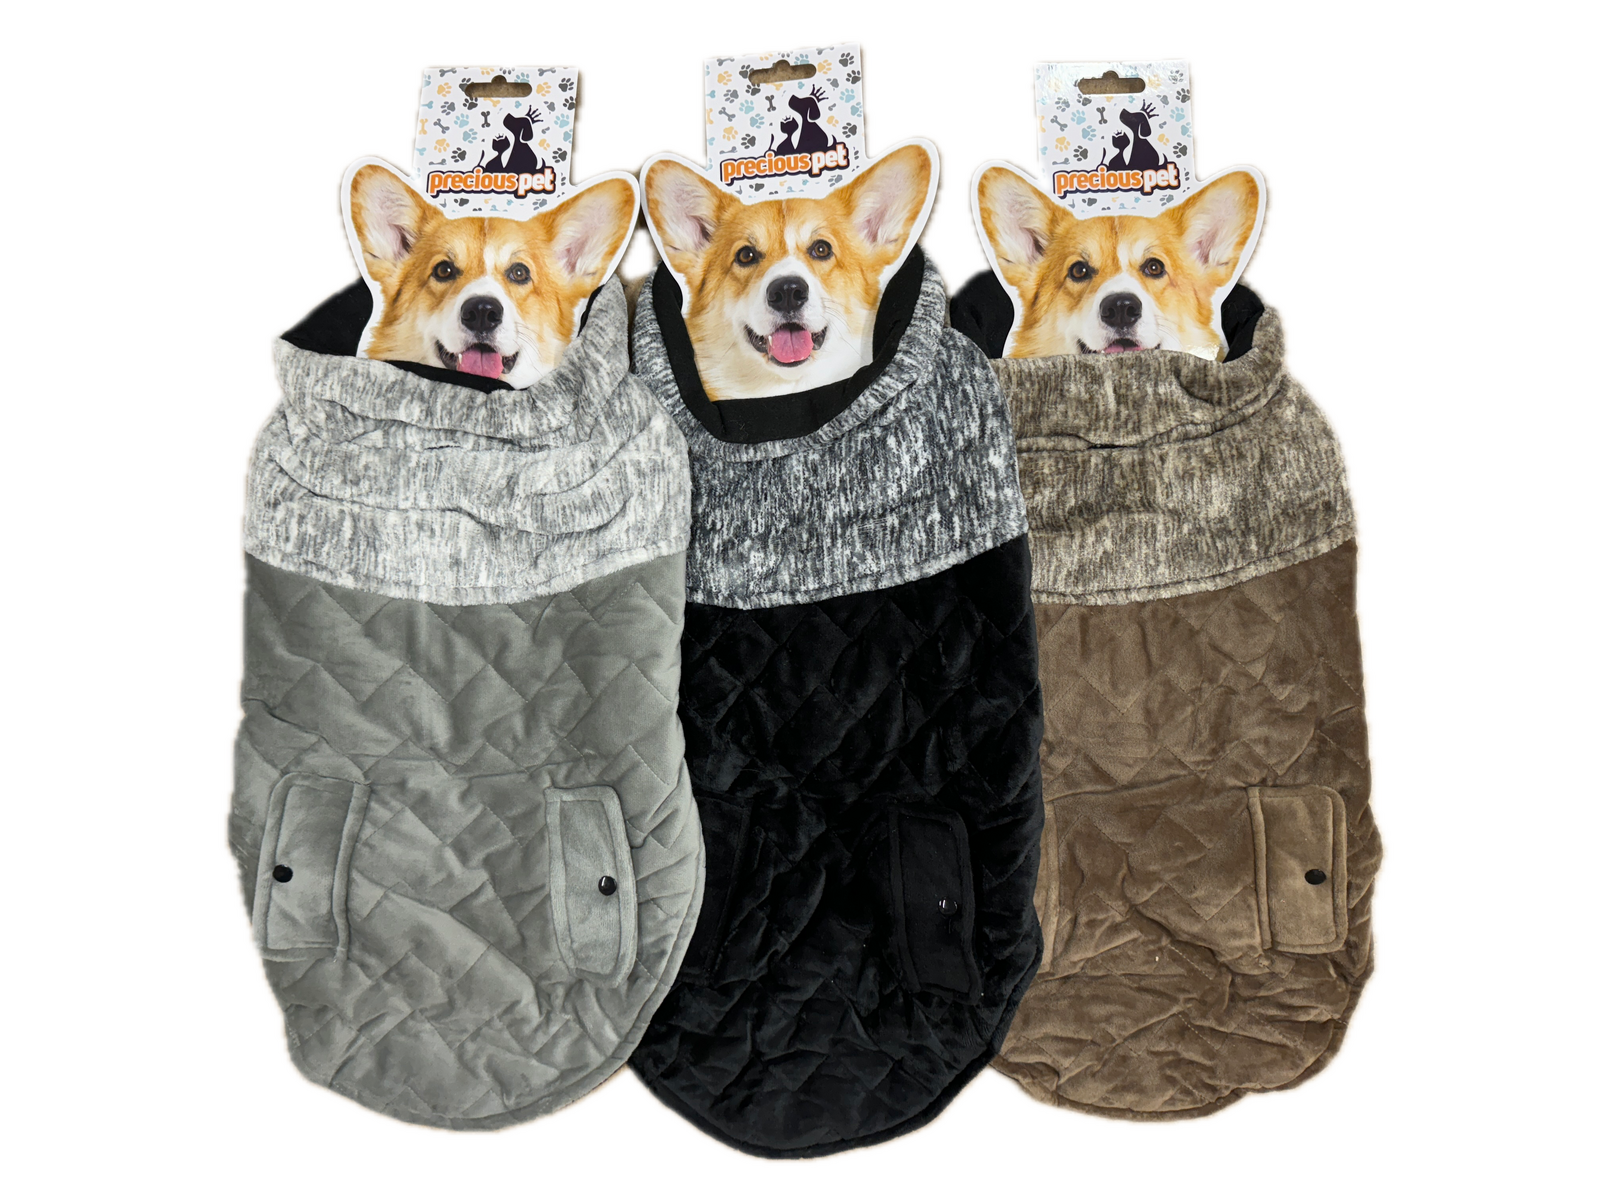 50cm Quilted Dog Jacket Coat Warm Winter Pet Clothes Vest Padded Windbreaker